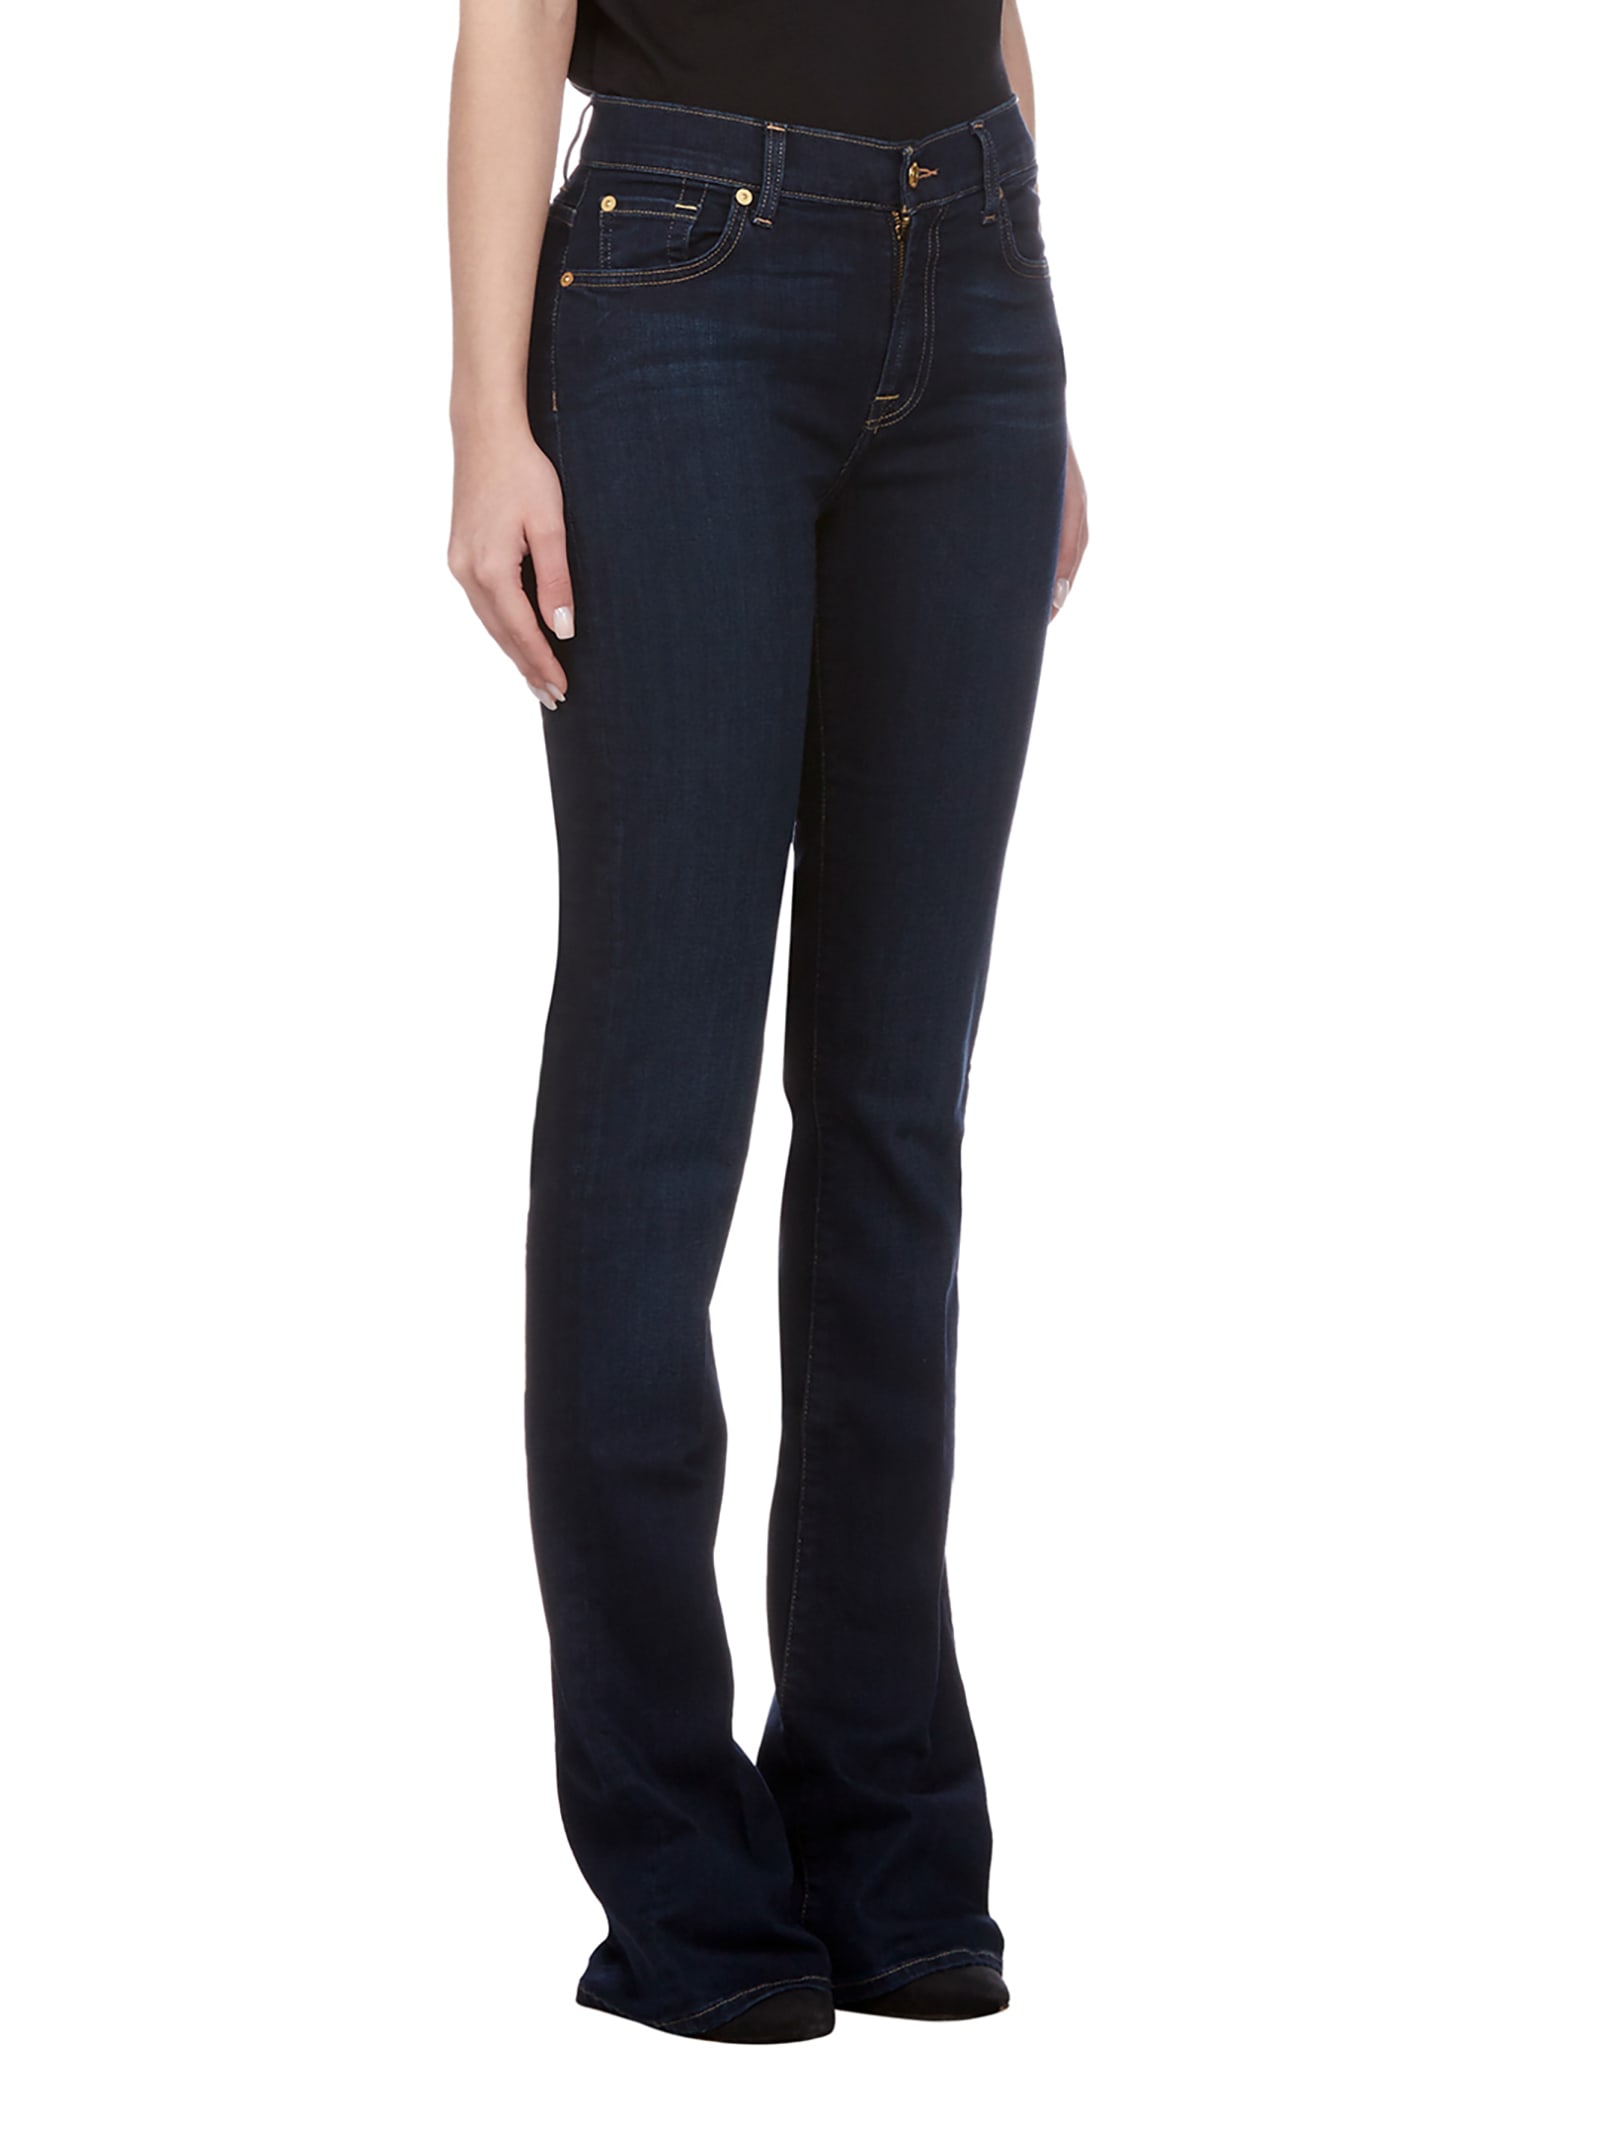 7 For All Mankind 7 For All Mankind Jeans - Indigo - 10969398 | italist